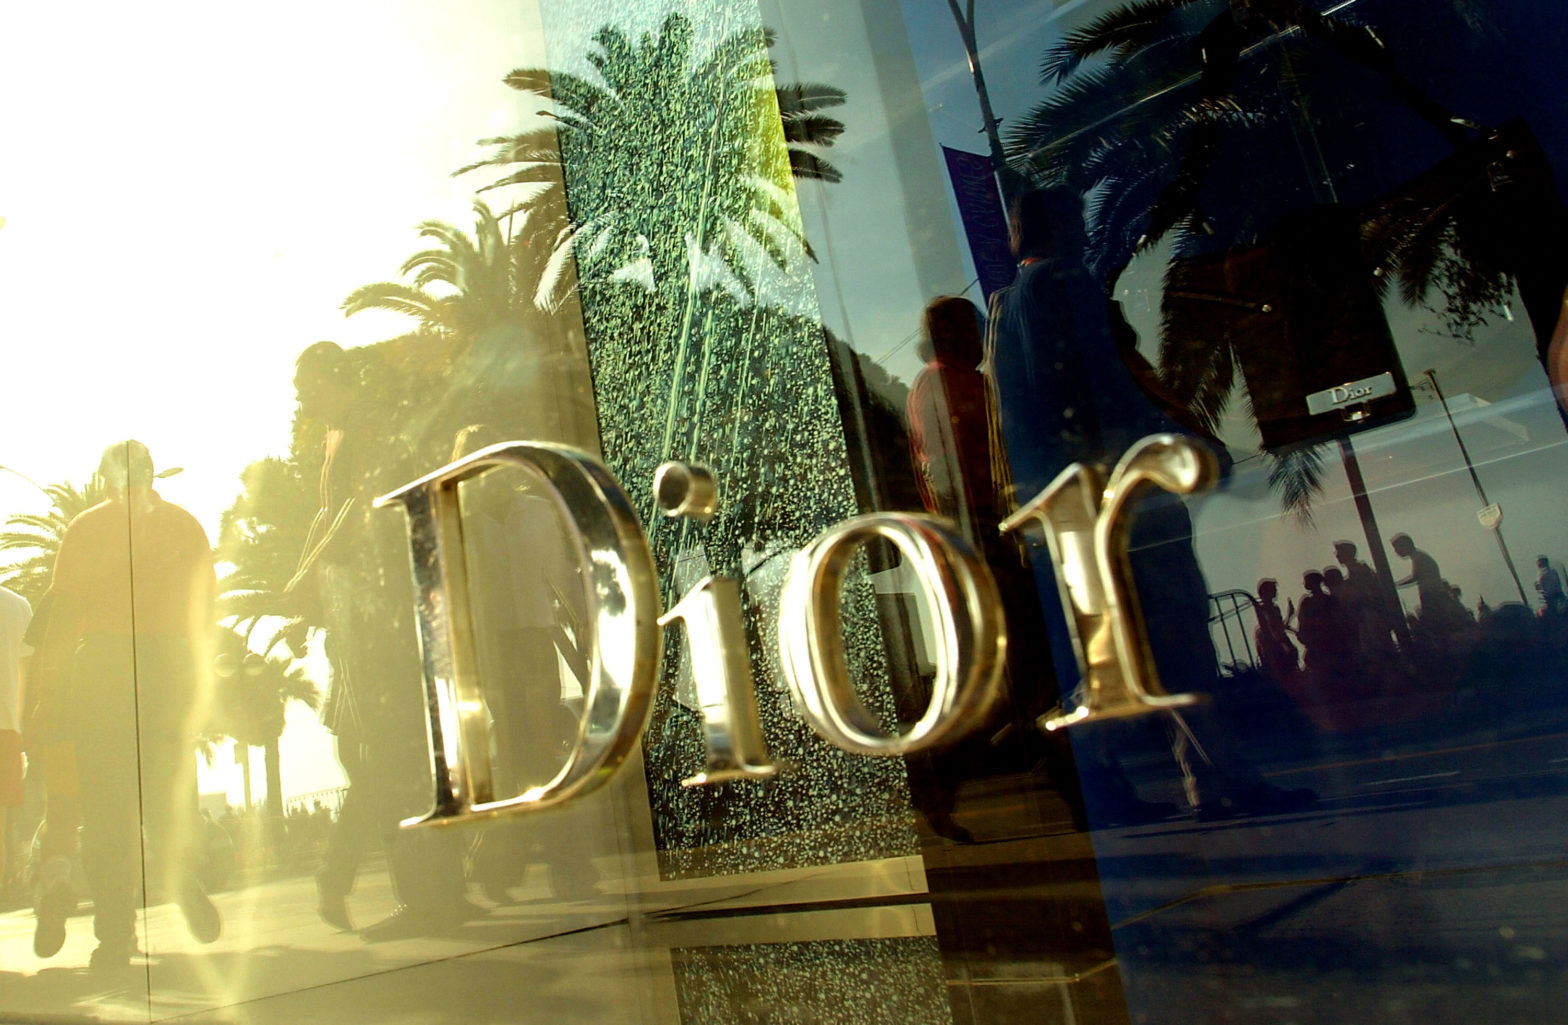 Luxury Fashion House Dior Will Be Showing Its Men's Pre-Fall Collection This December In Egypt